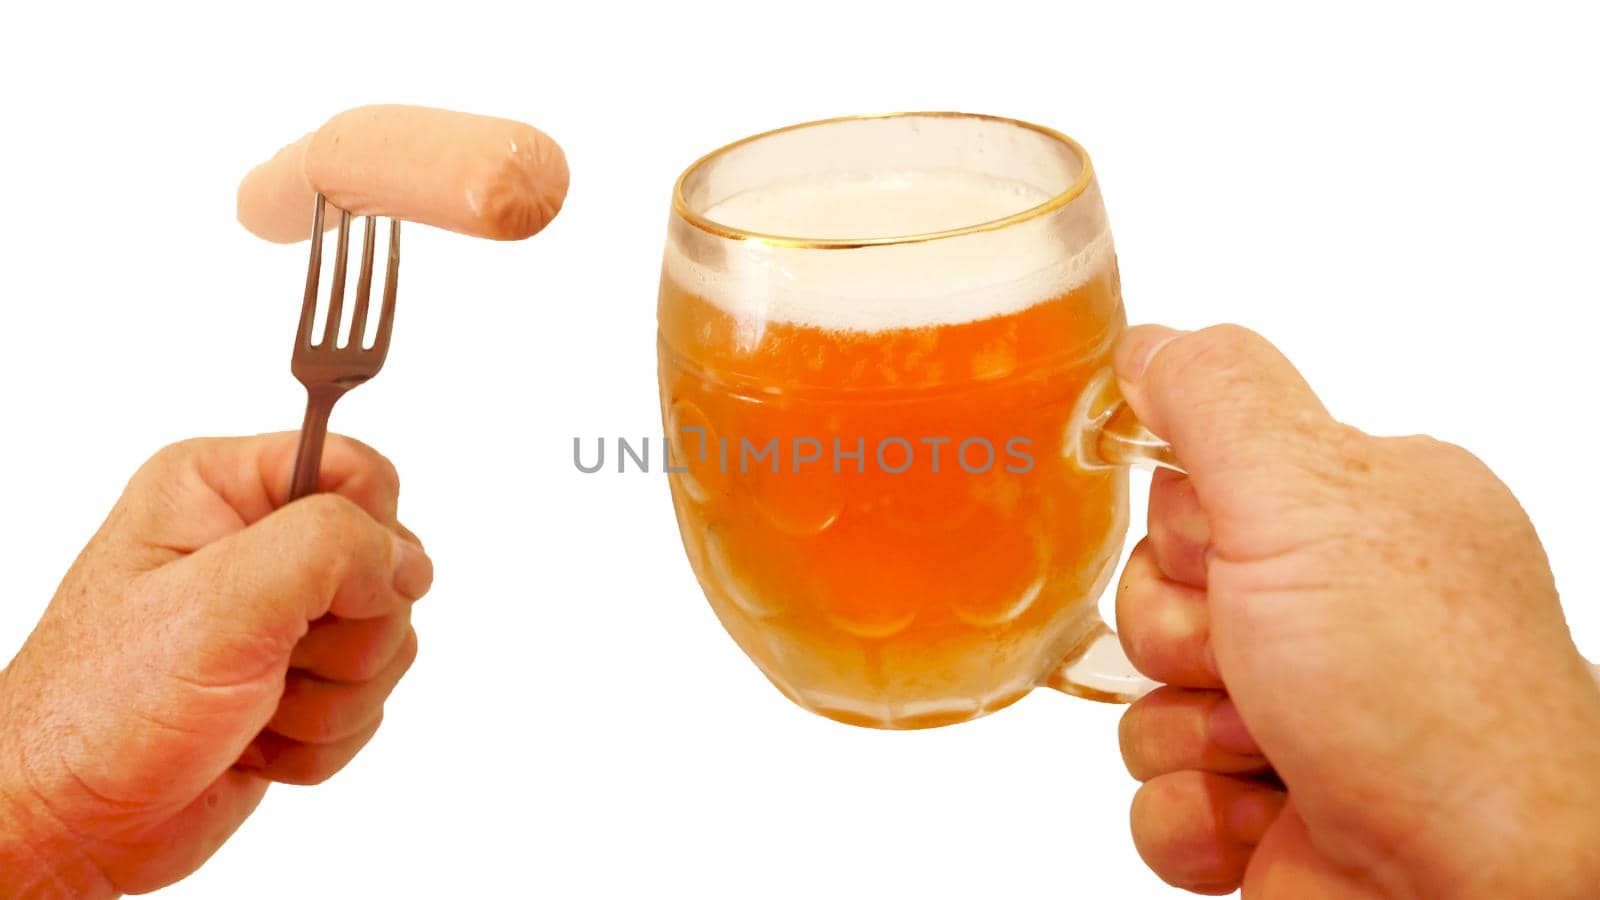 sausage on a fork and a mug of beer in male hands, isolate on a white background